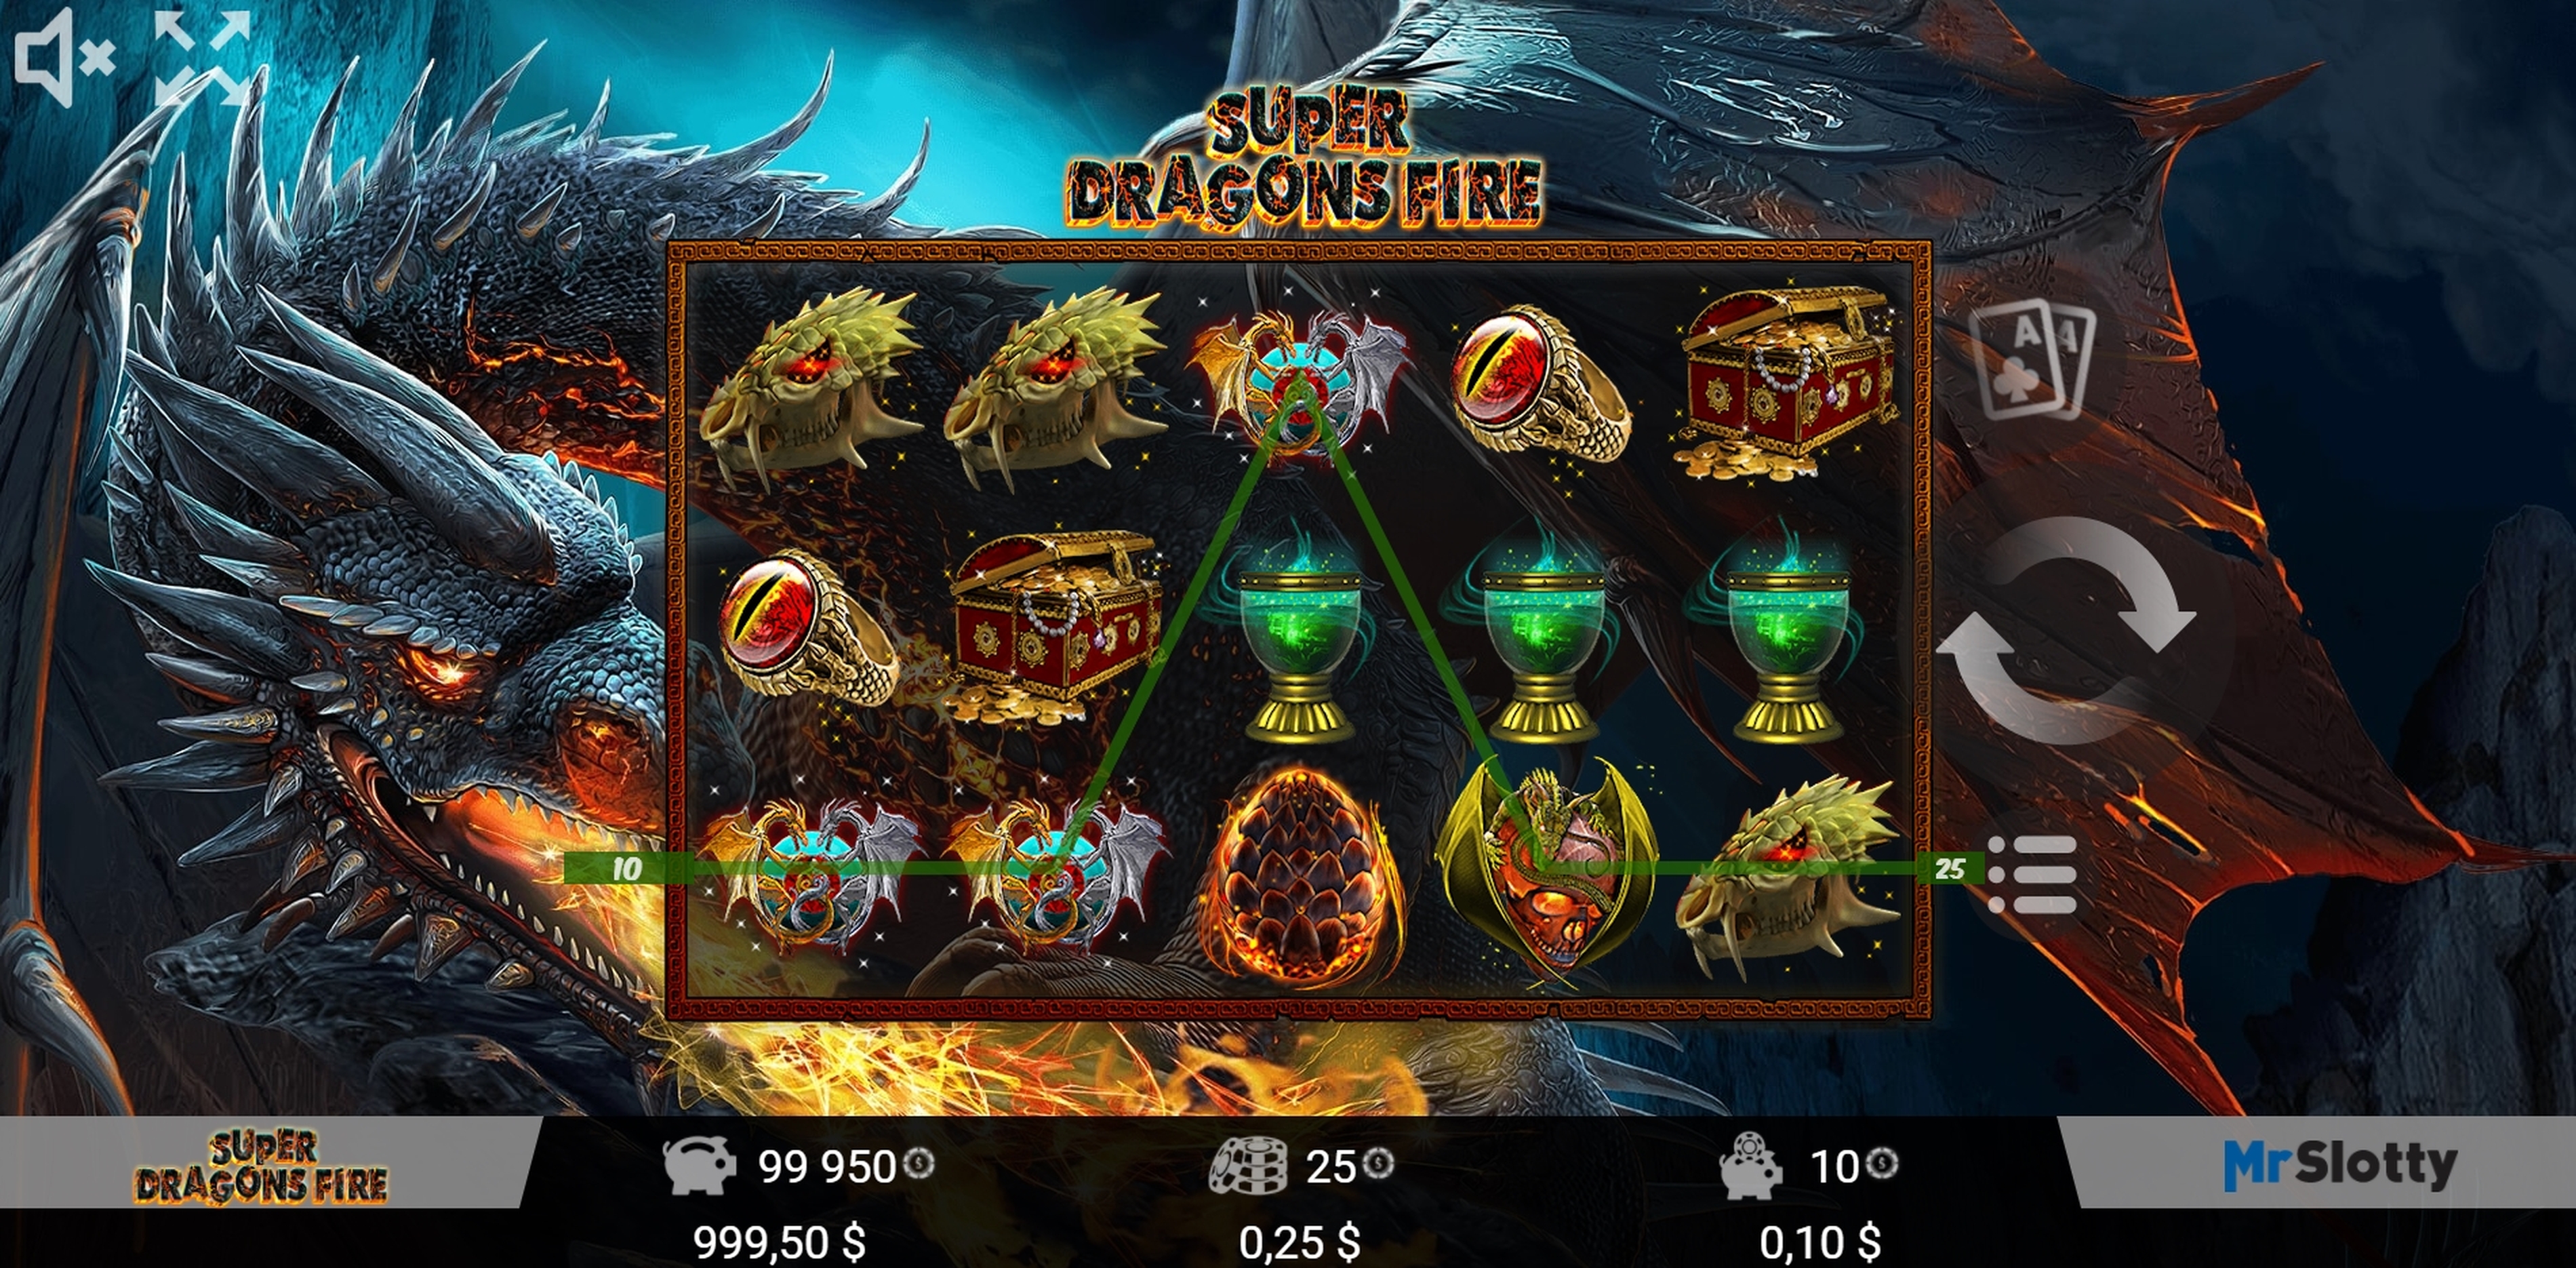 Win Money in Super Dragons Fire Free Slot Game by Mr Slotty